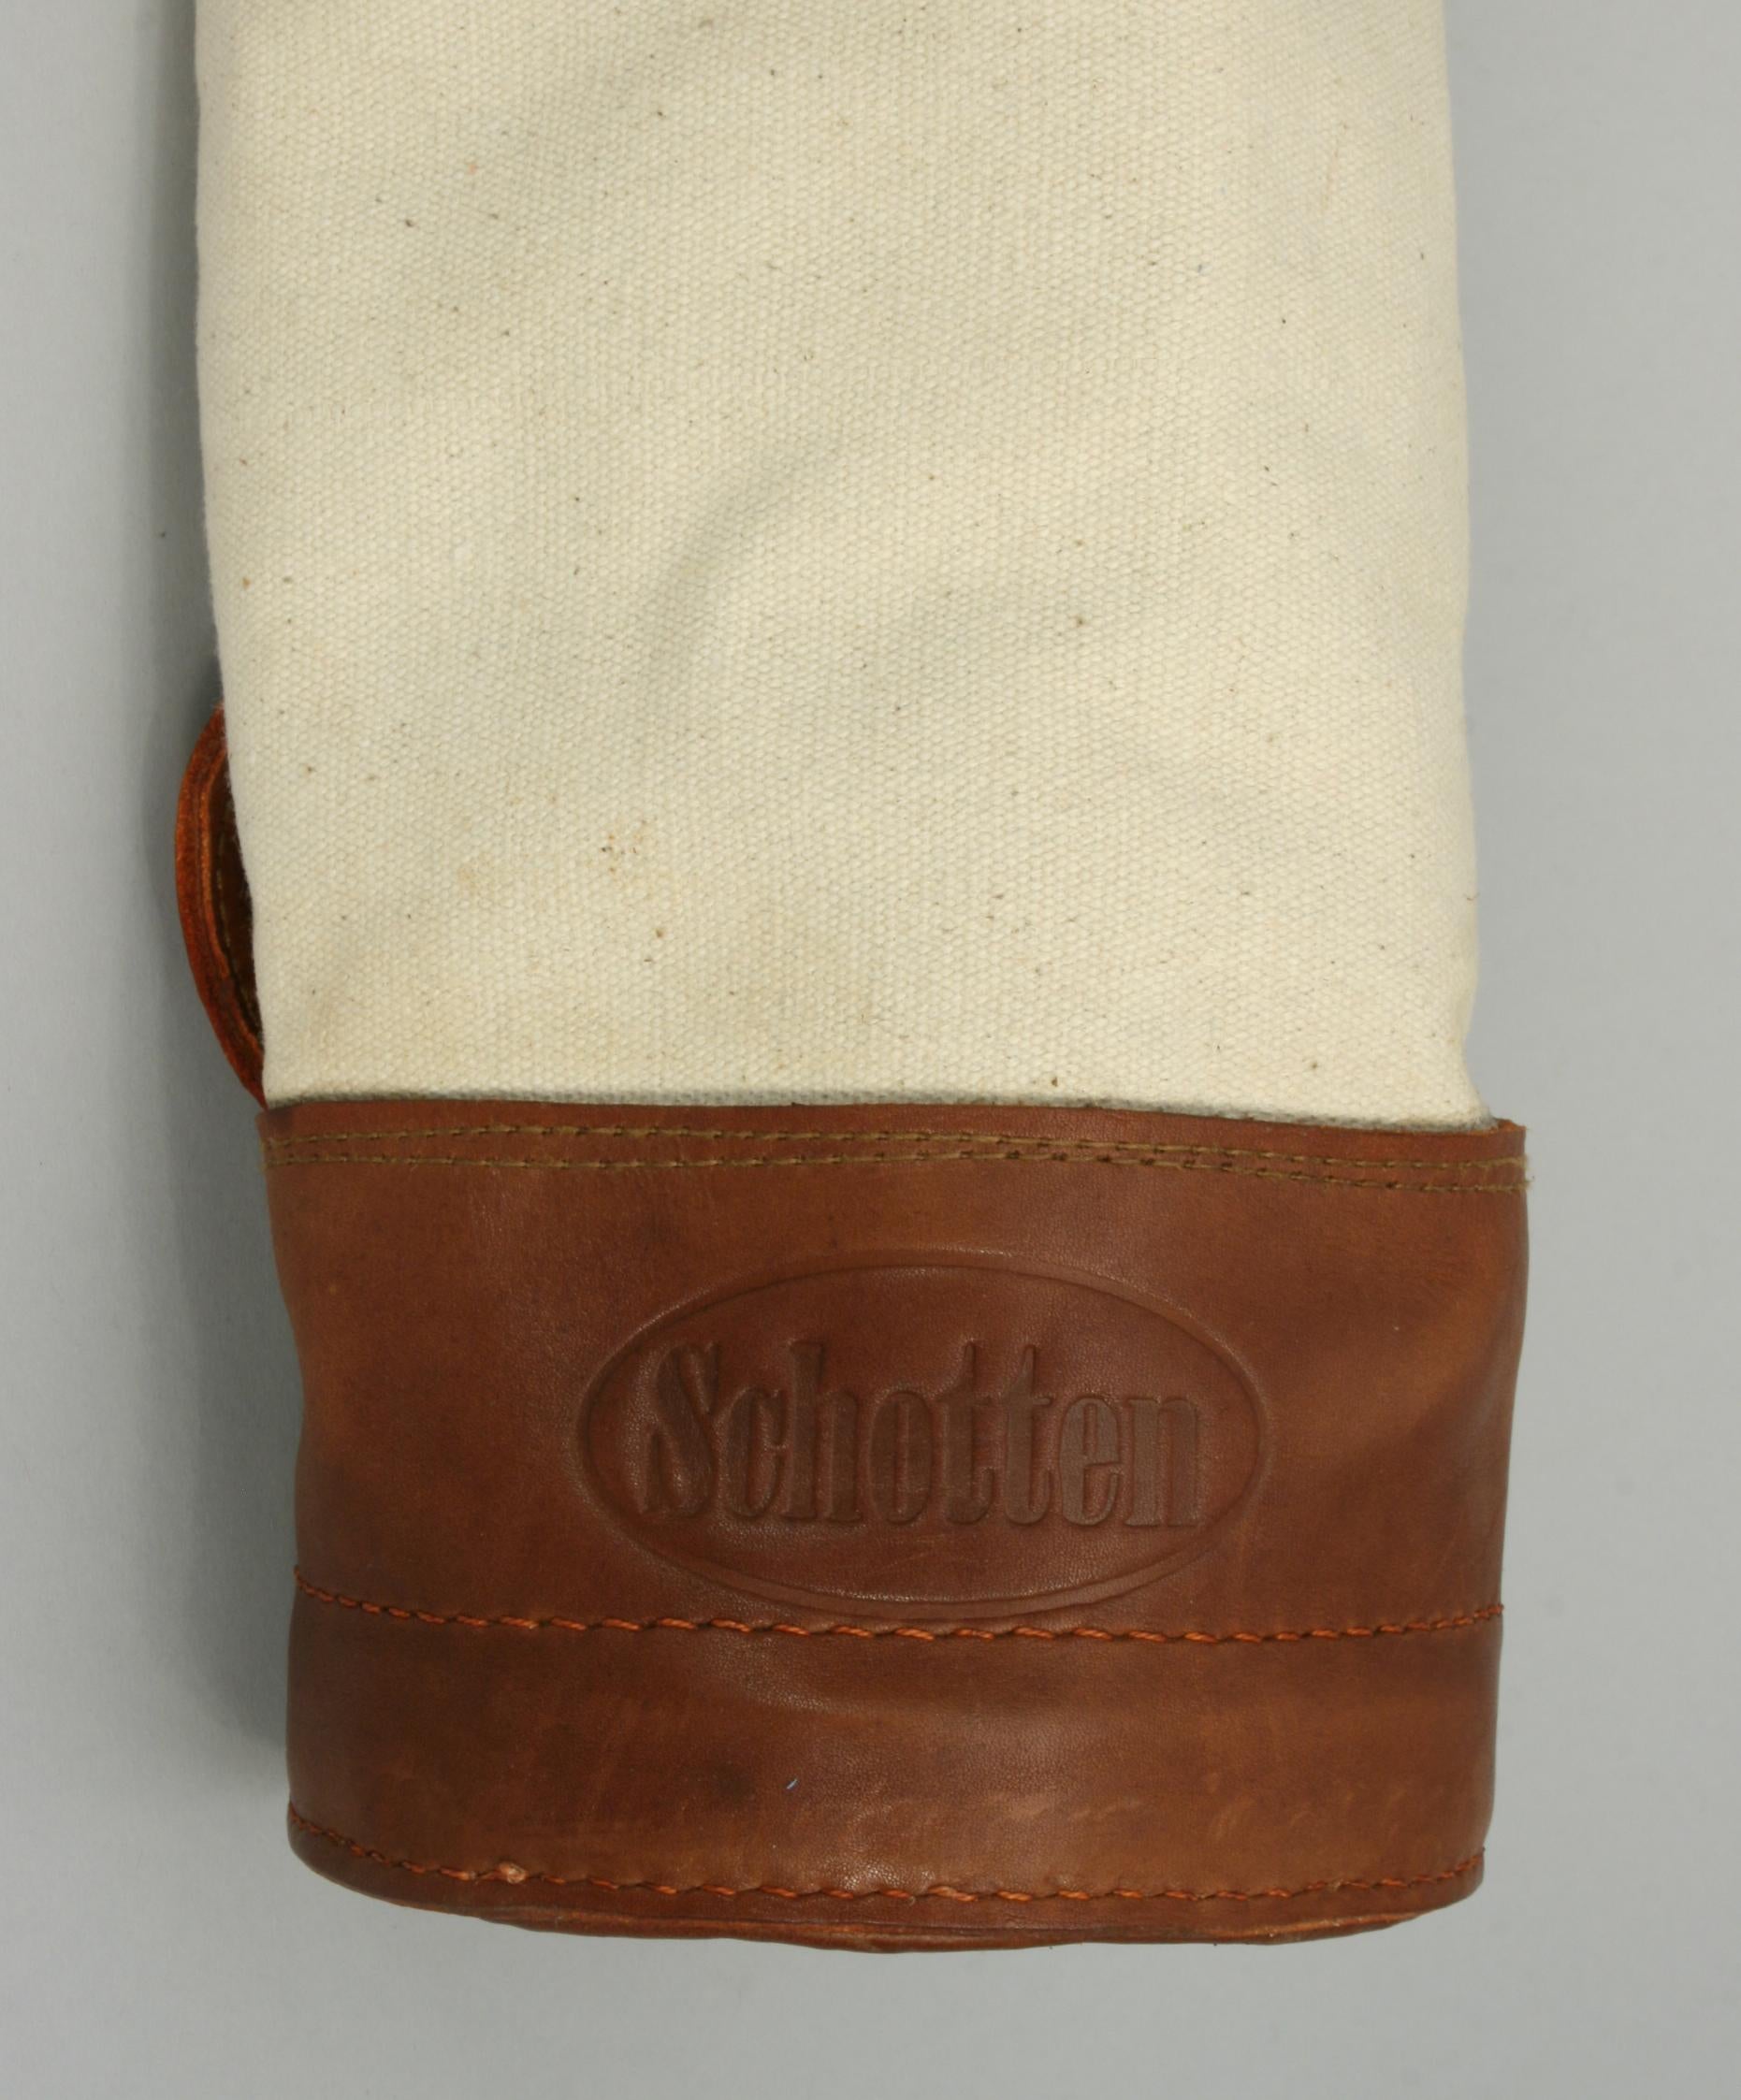 English Schotten Canvas Golf Bag in a Vintage 1930s Style